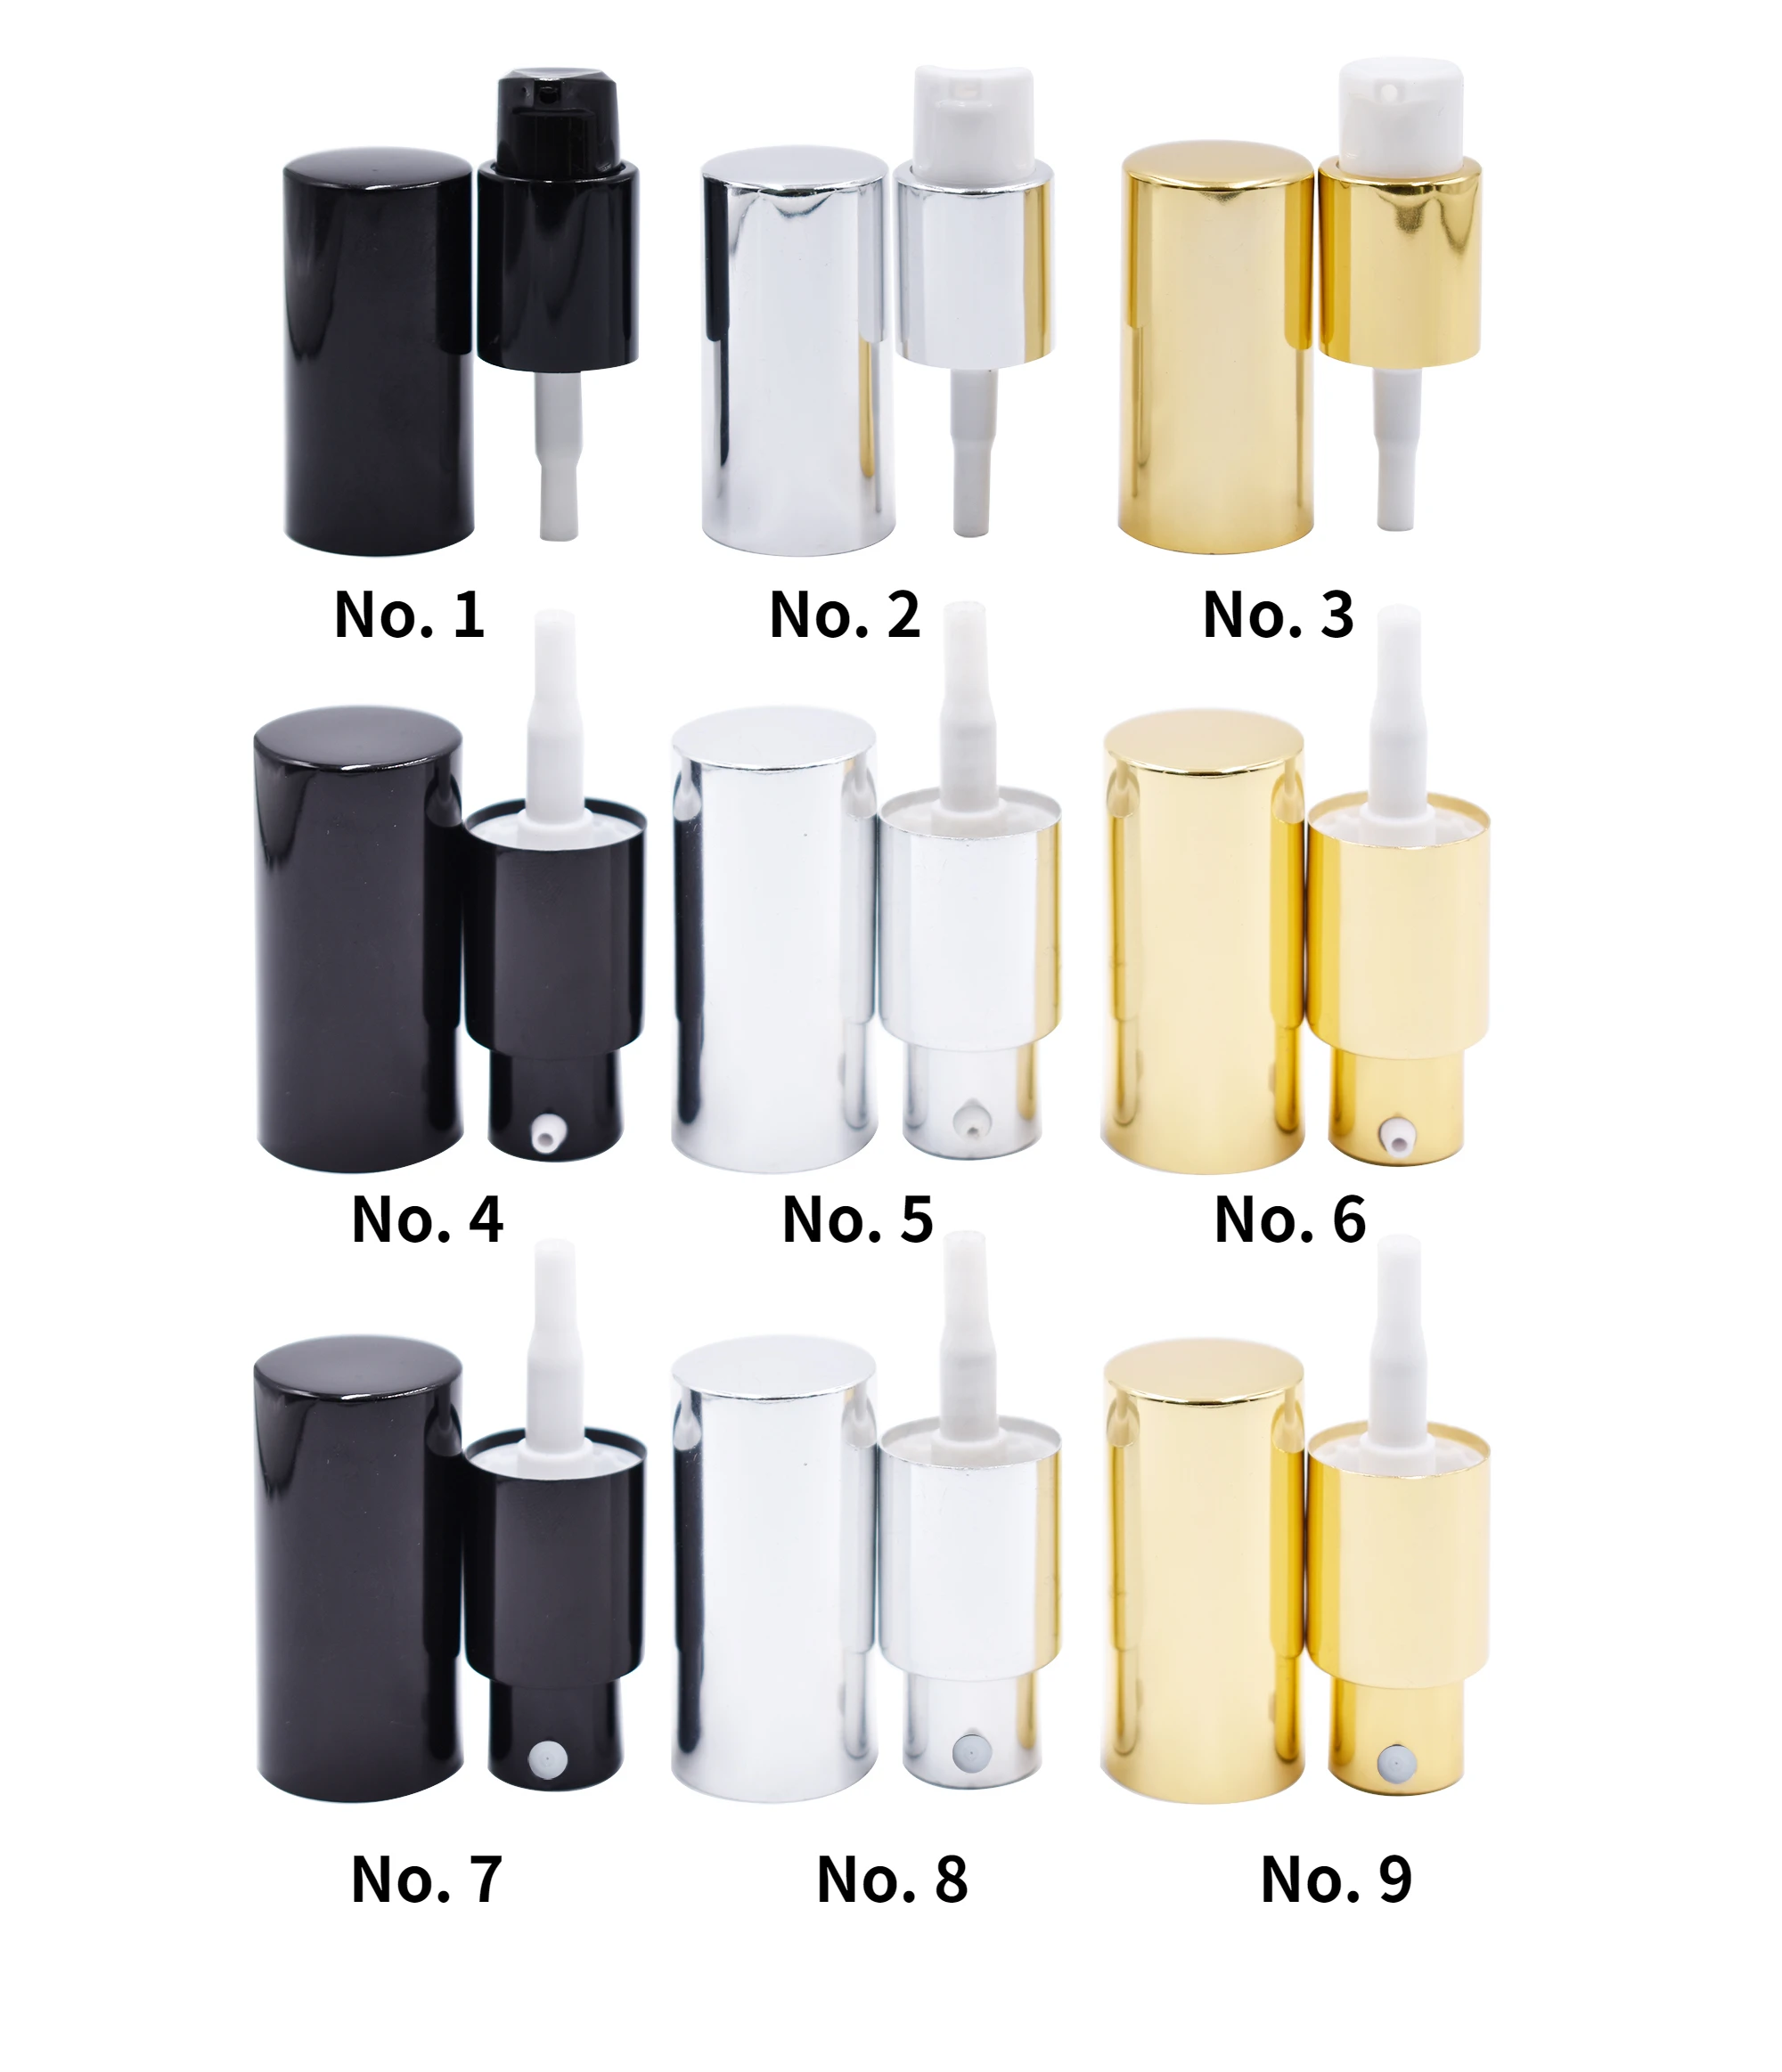 20pcs/lot 18mm Alumite gold / silver / black spray pump cap with cover for perfume and cream bottles for 10ml 30ml 50ml 100ml